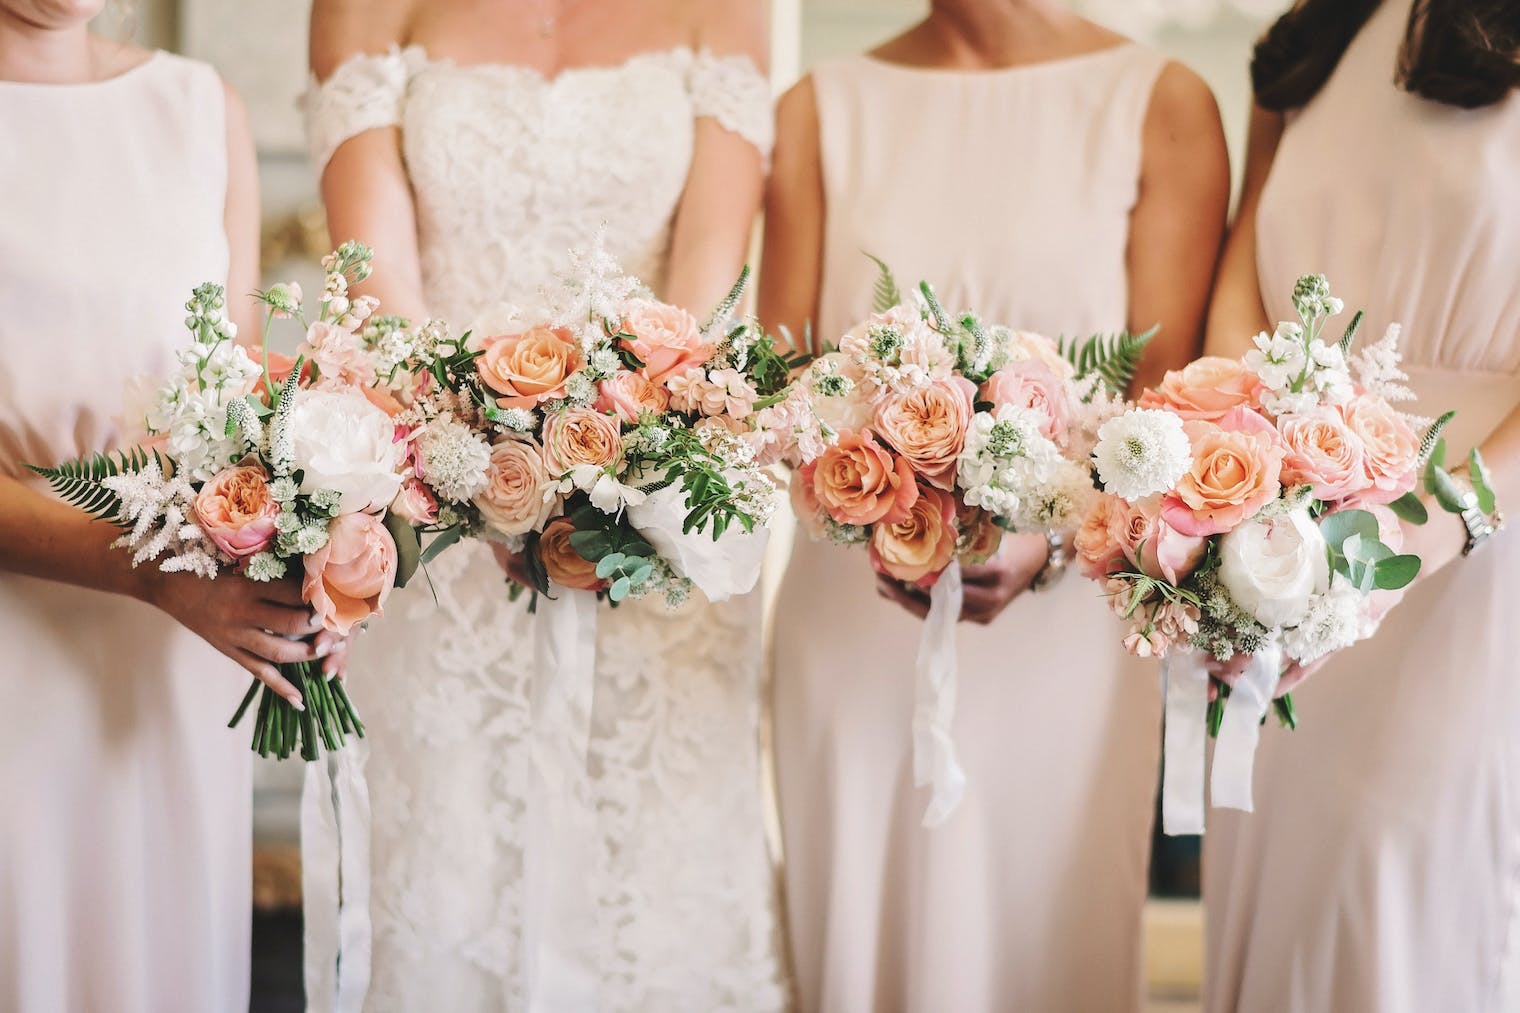 The Average Cost of Wedding Flowers for All Your Floral Needs